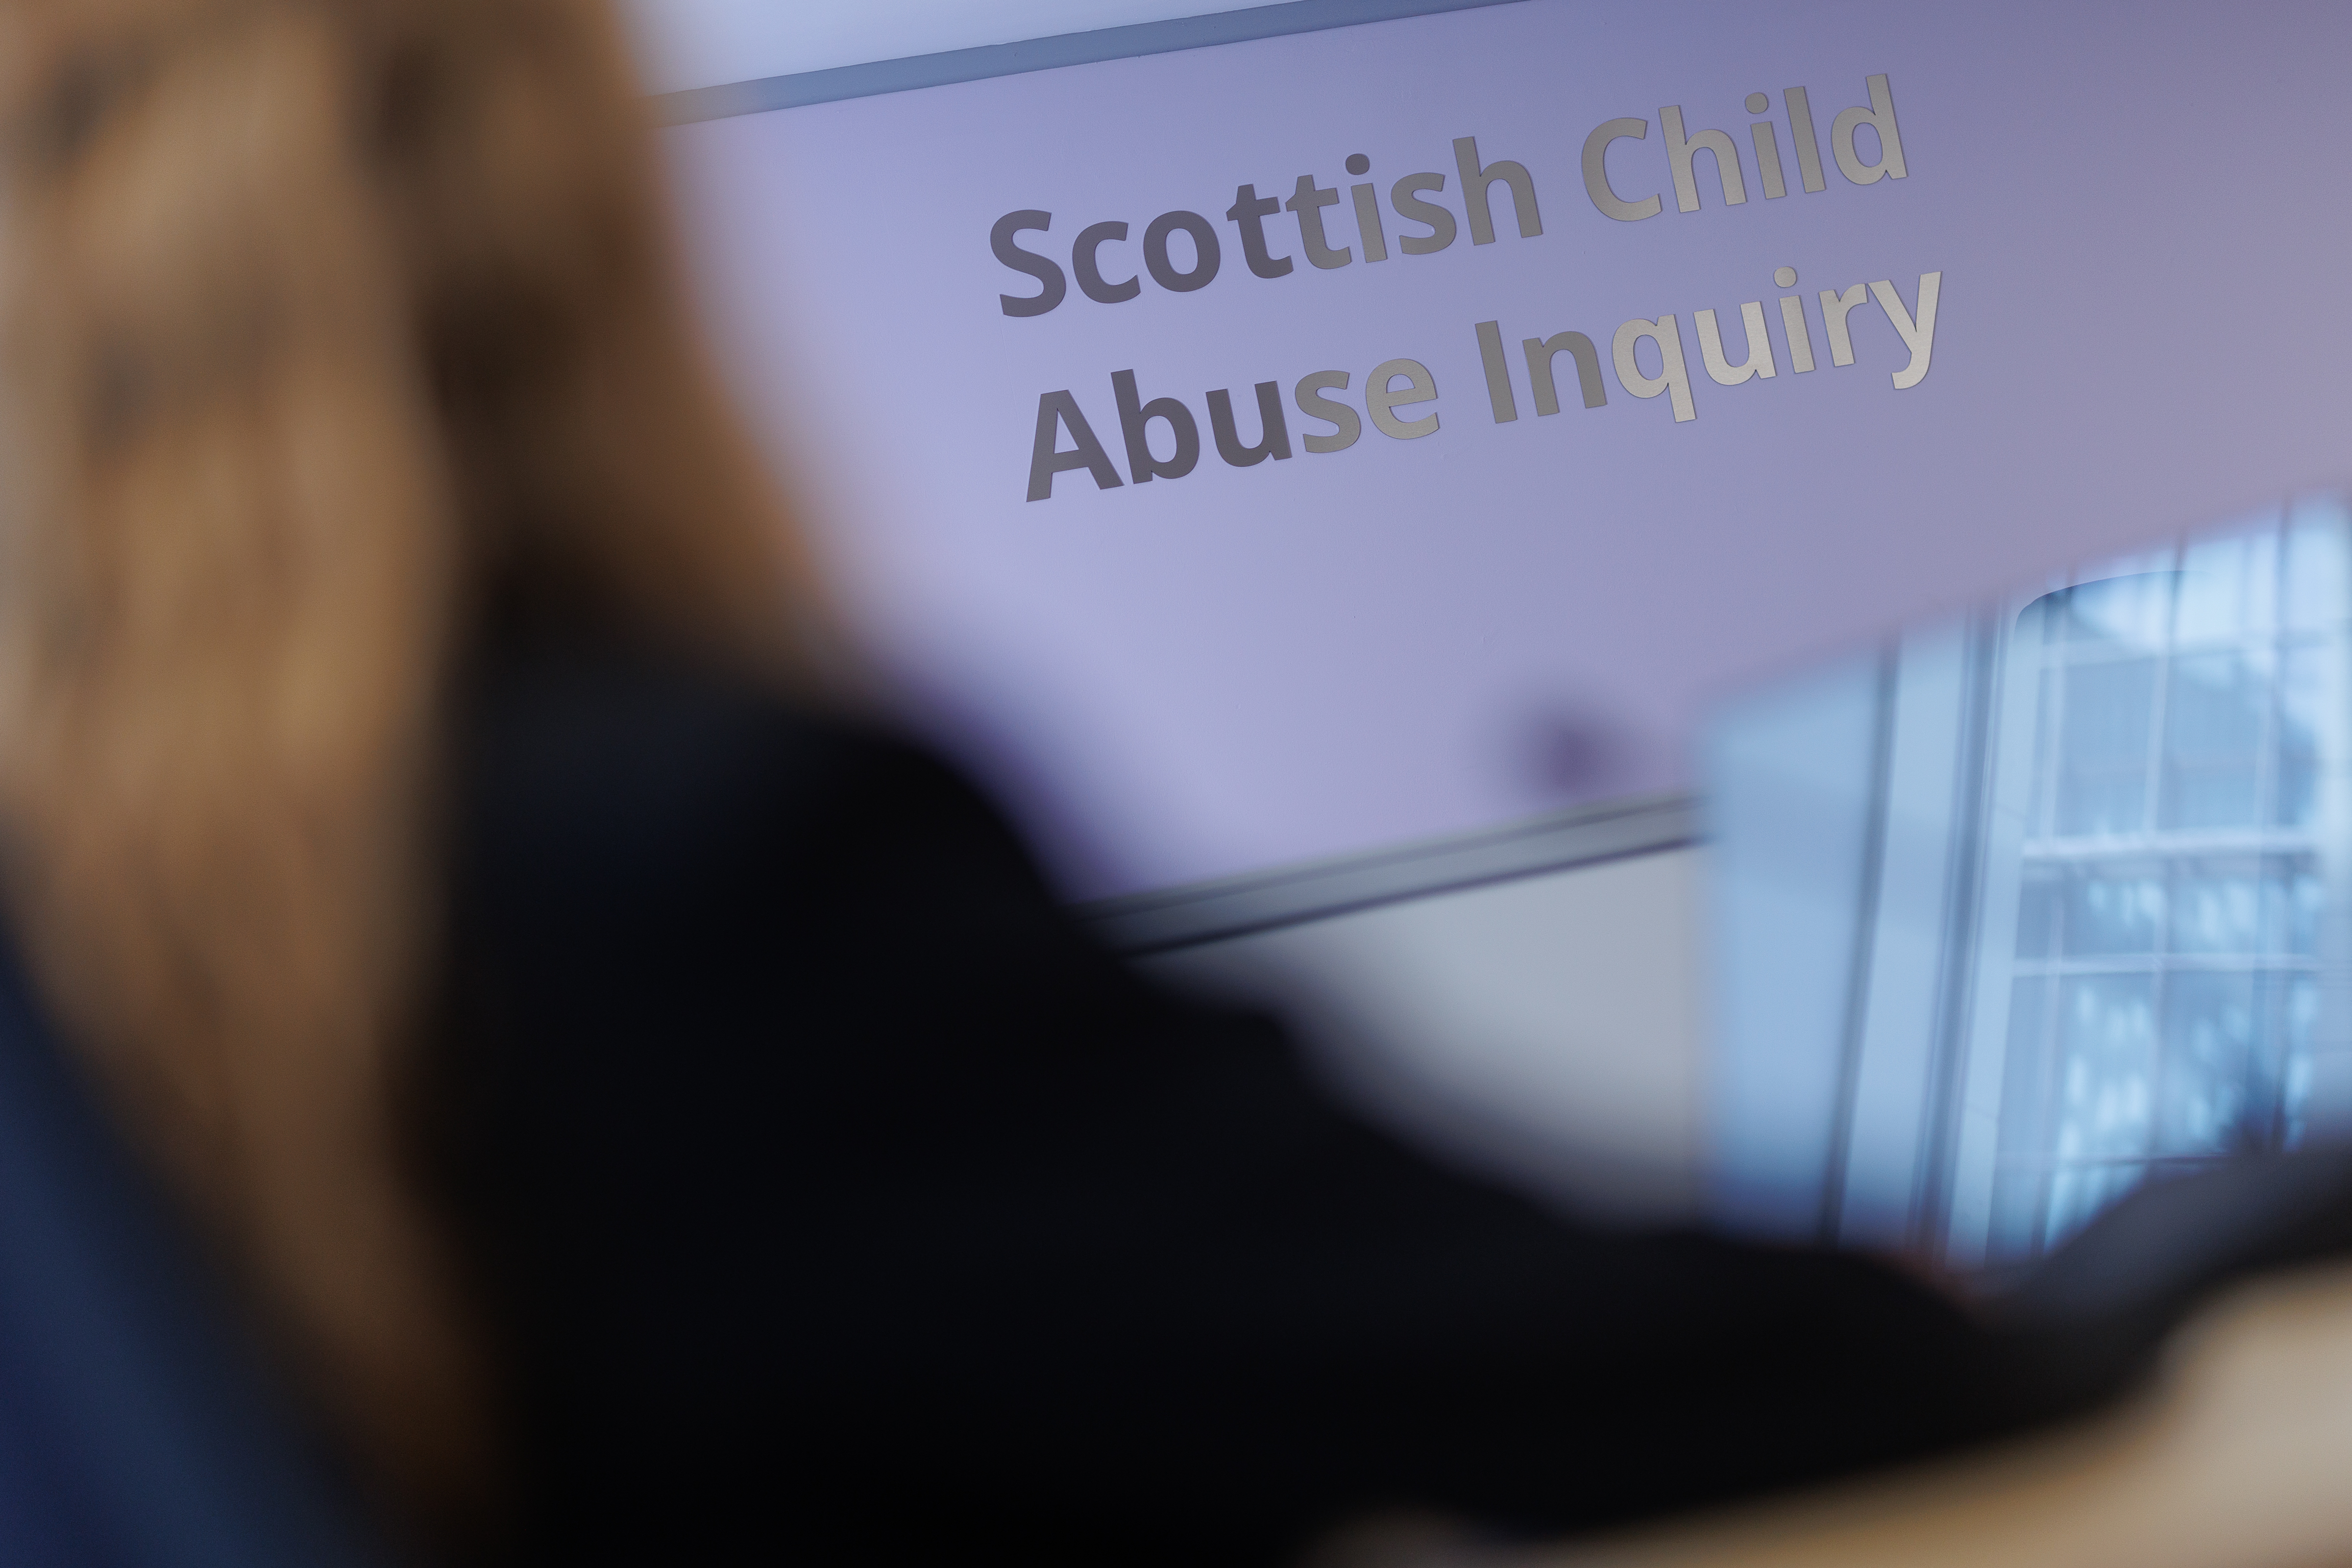 Picture of sign saying Scottish Child Abuse Inquiry on a lilac wall